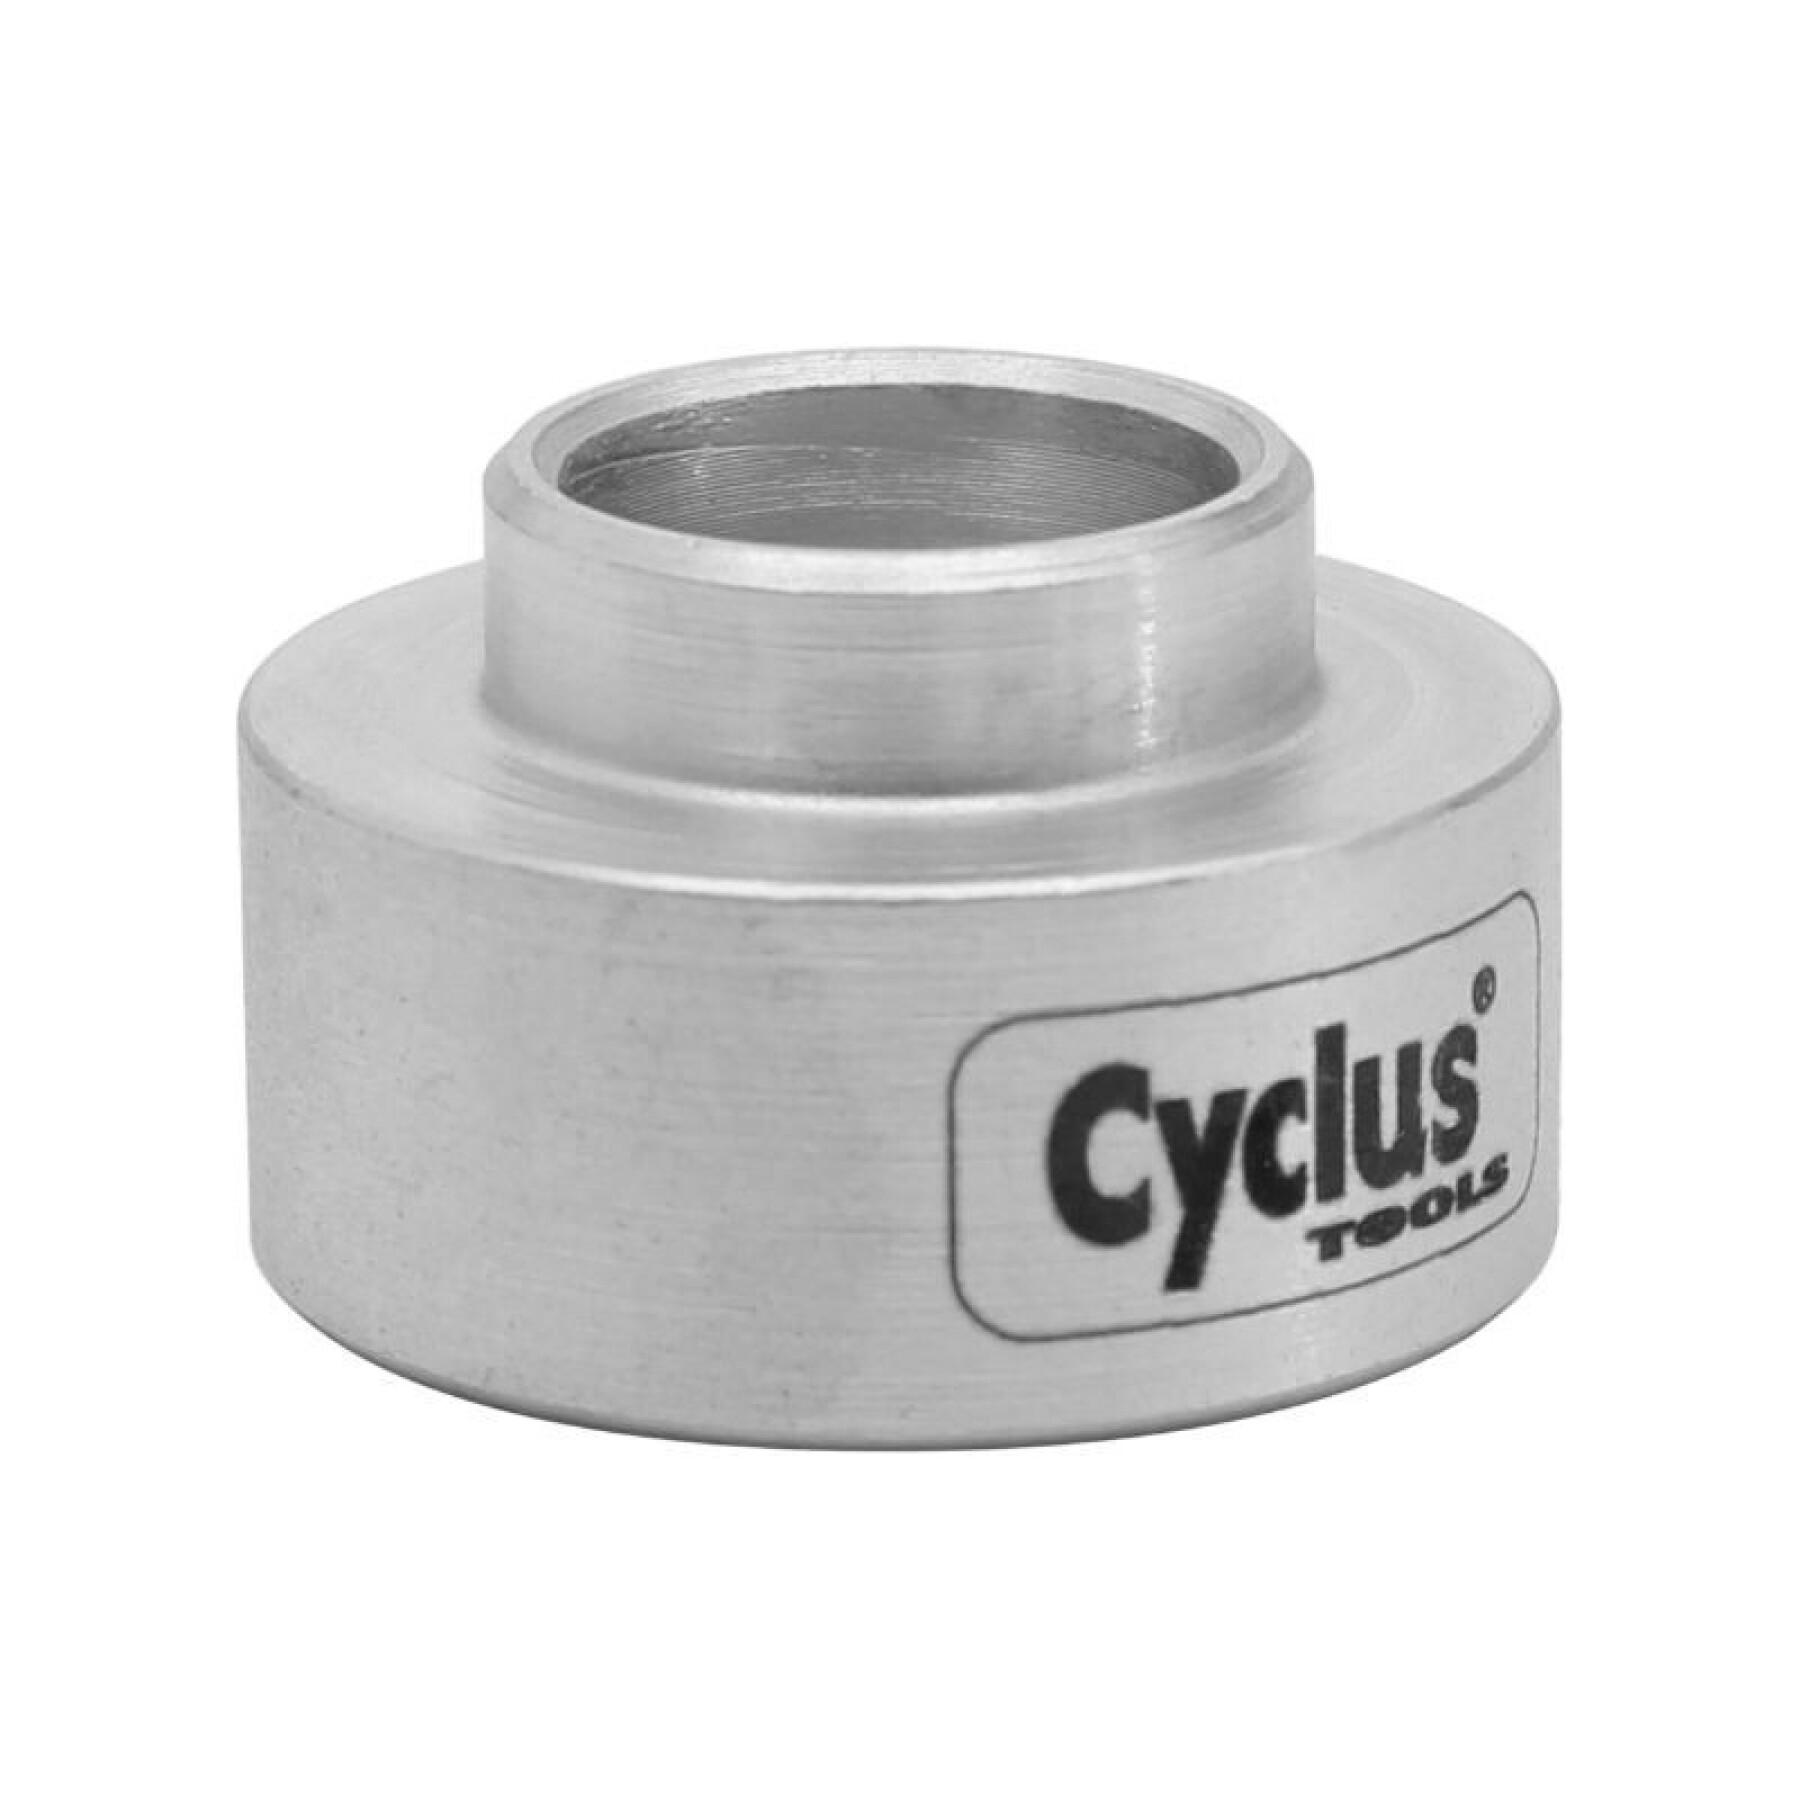 Tool pro bearing support to be used with the bearing press Cyclus ref 180126